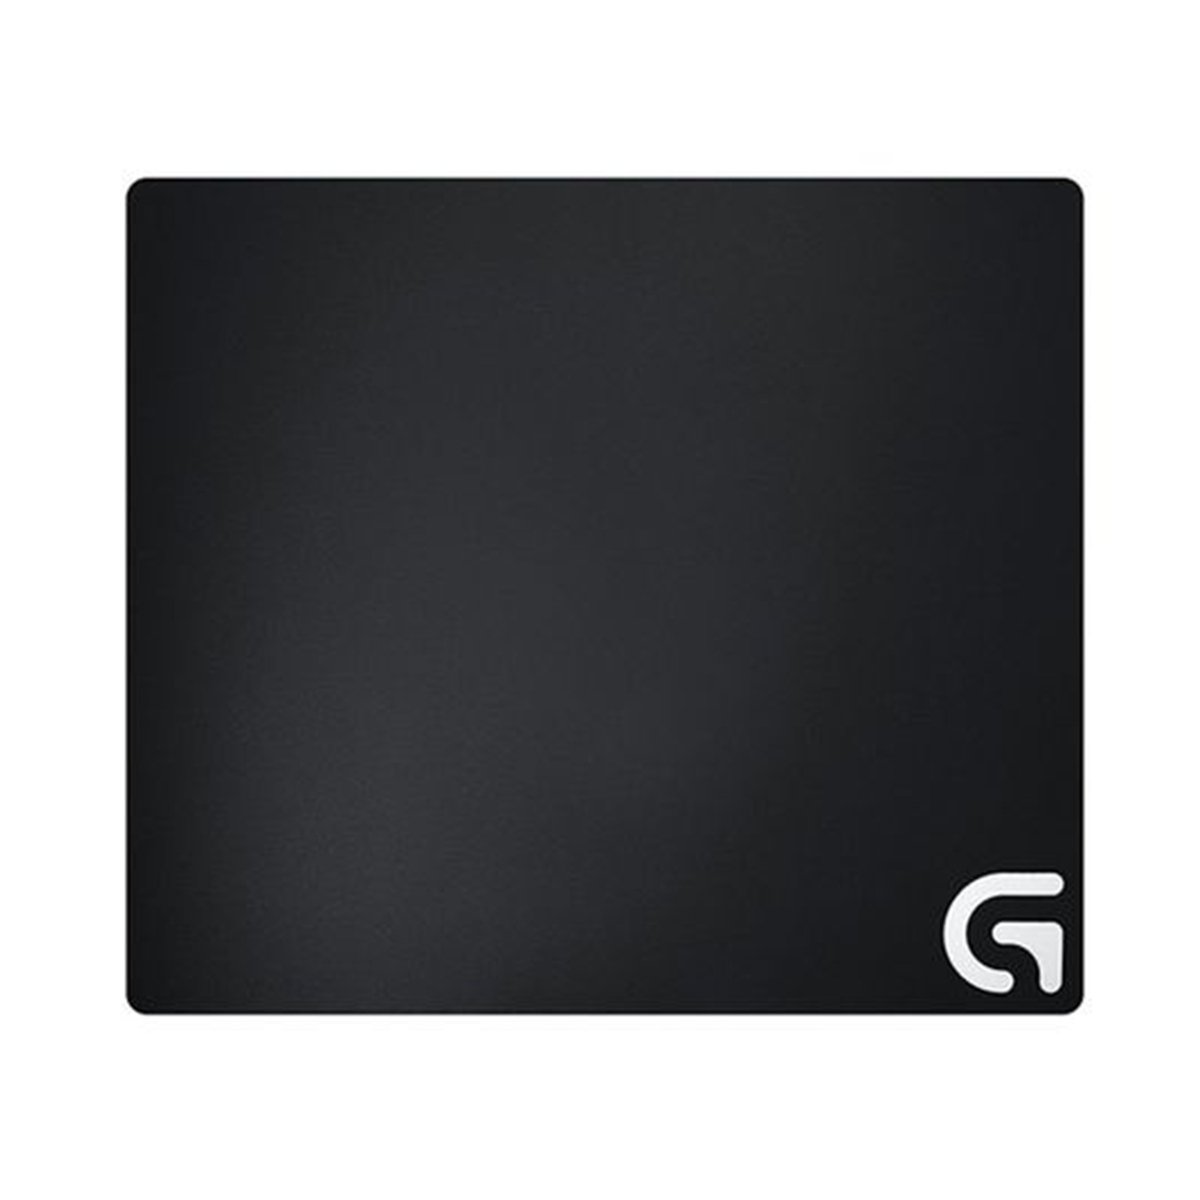 Logitech Gaming Mouse Pad G640